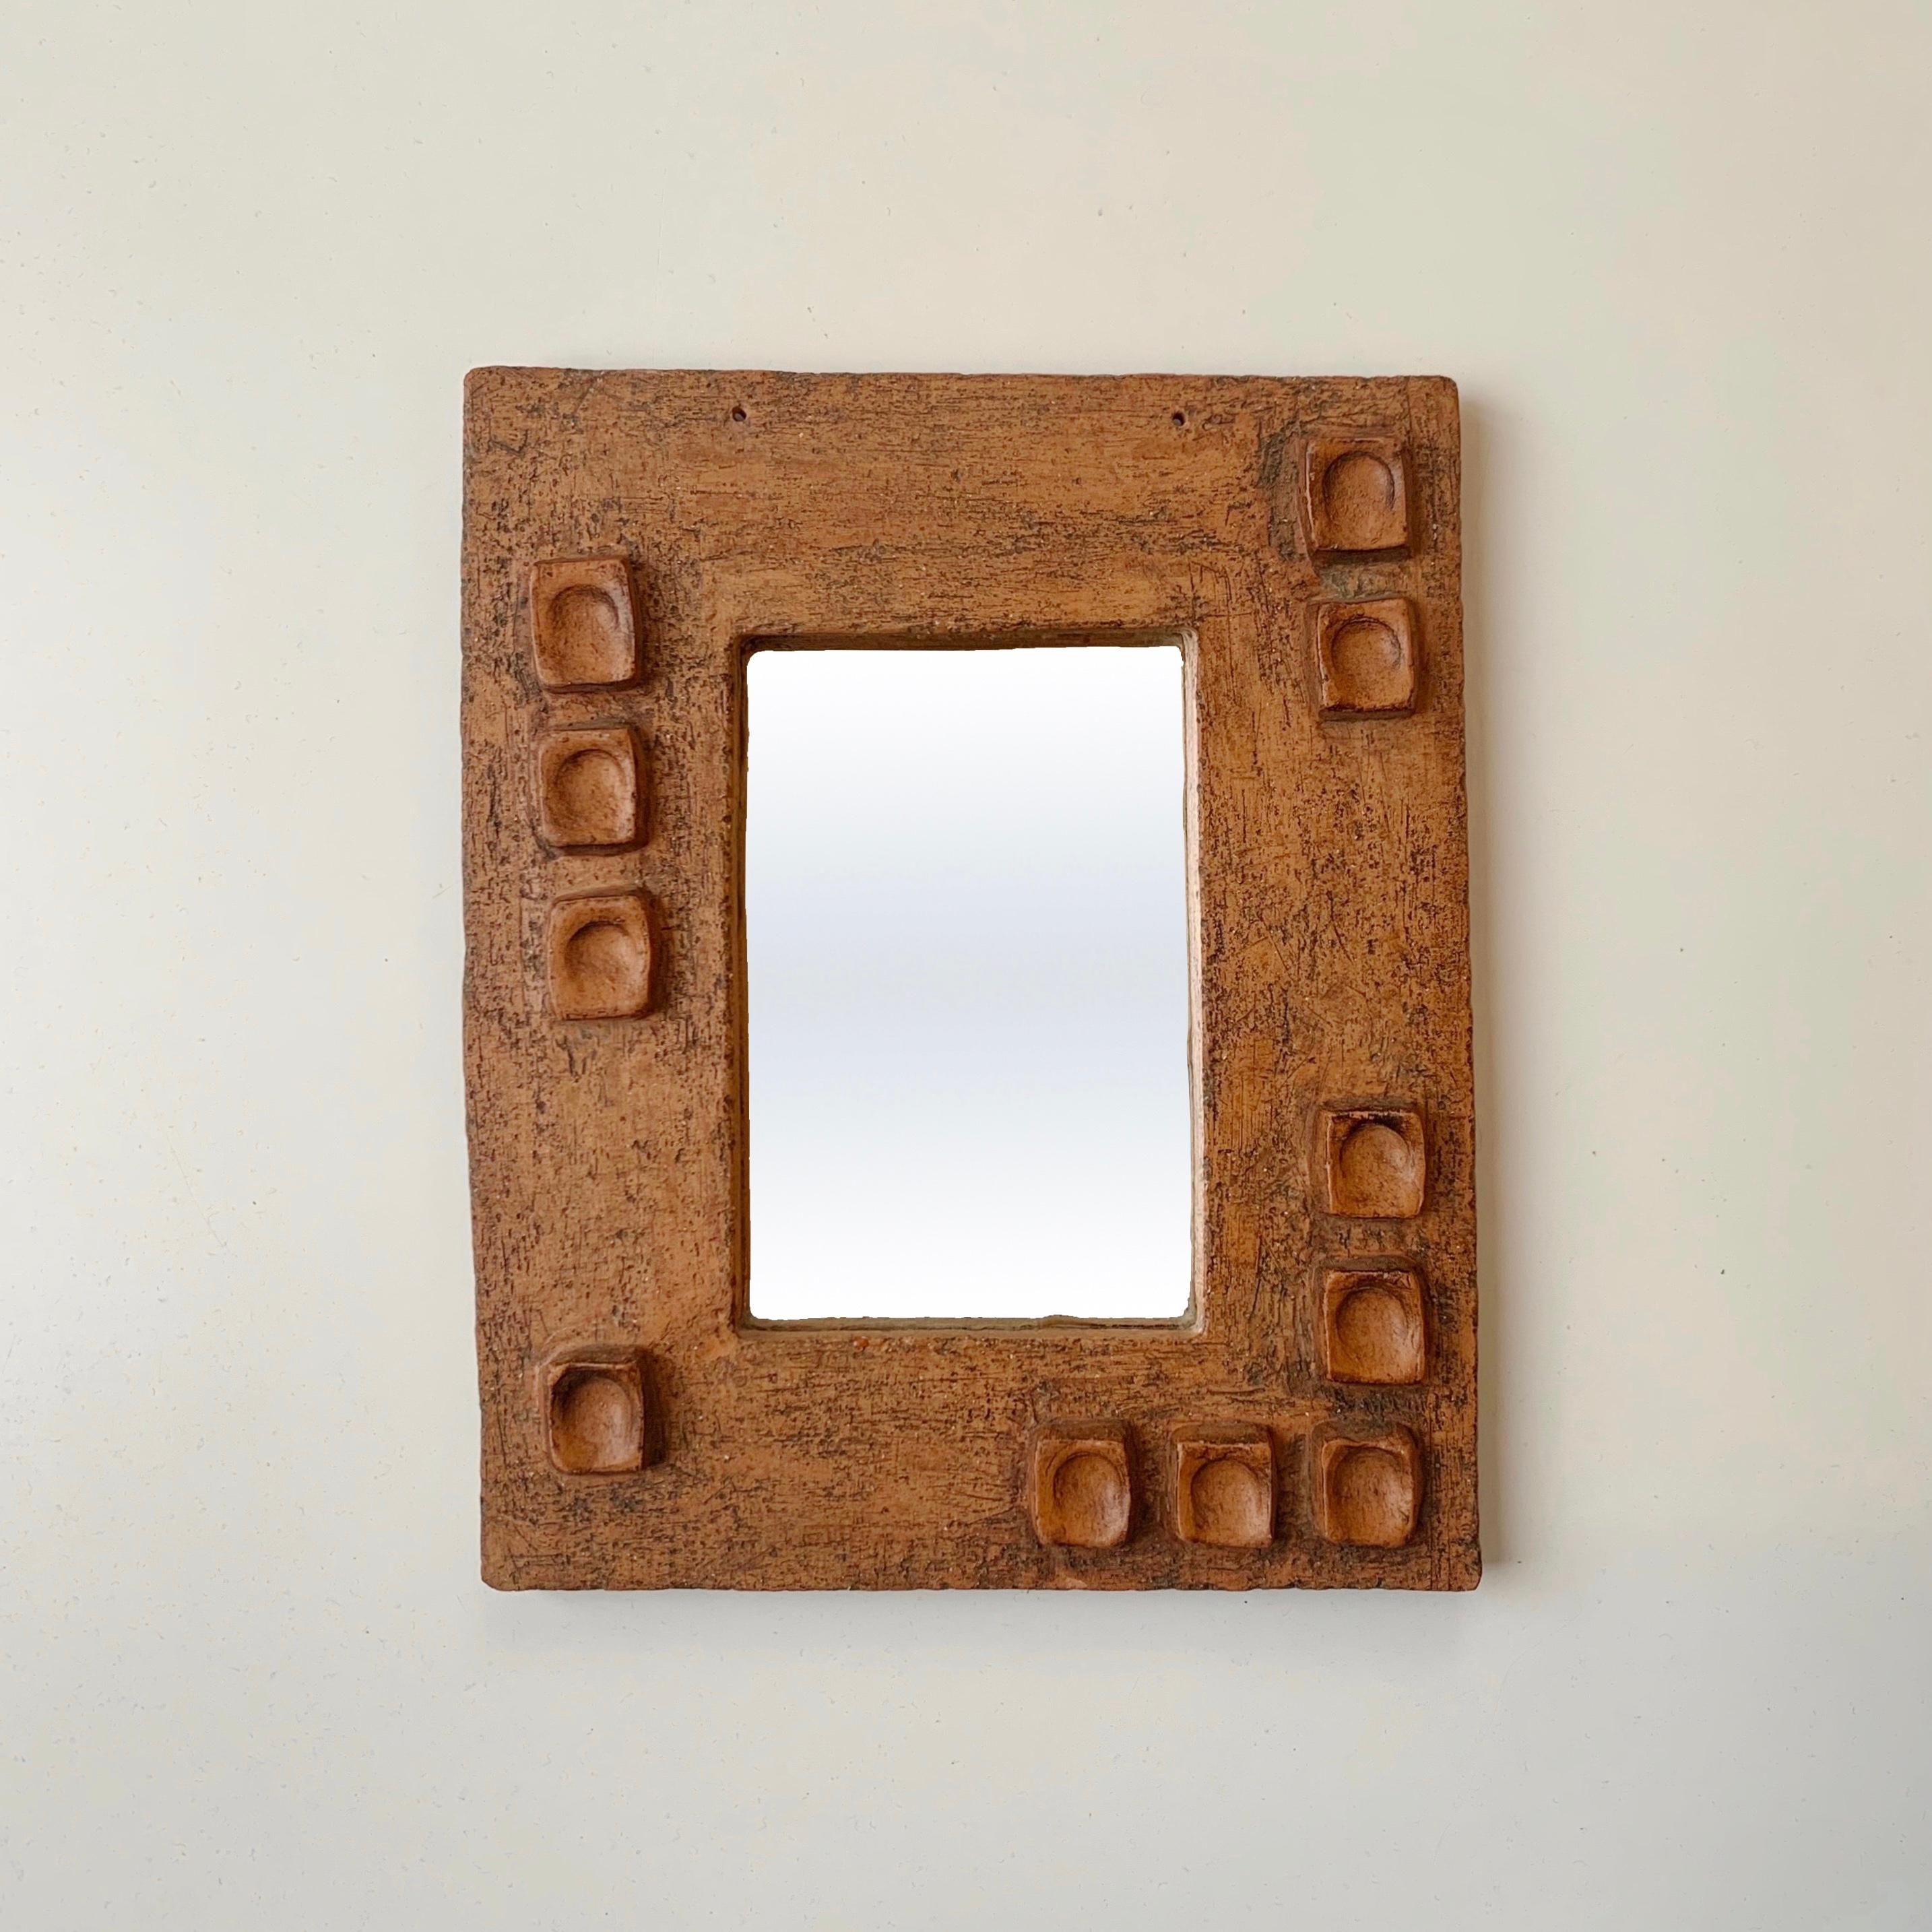 Ceramic Mirror With Abstract Composition circa 1950, France. 10